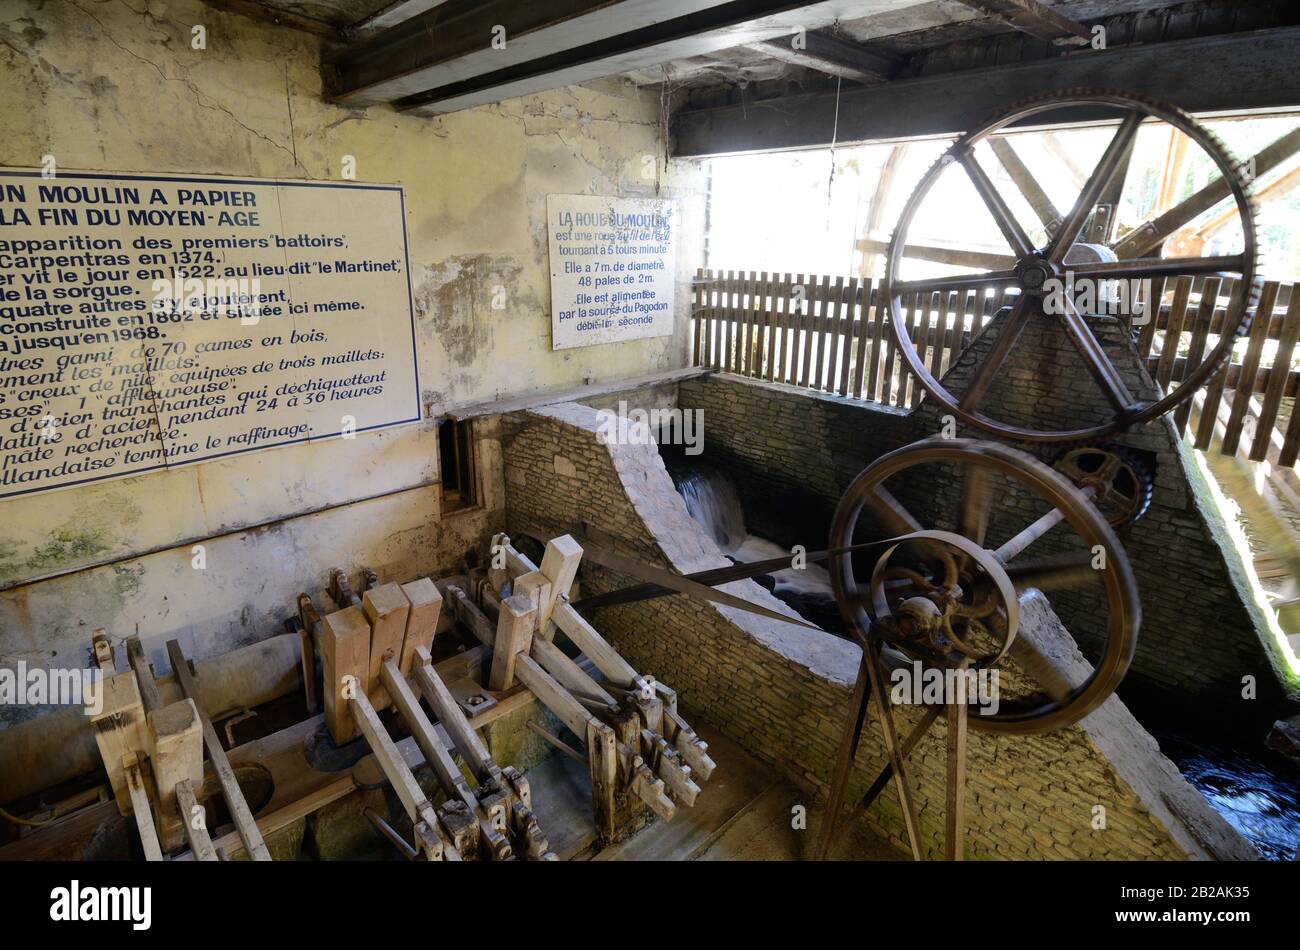 Water-Powered Paper Mill Fontaine-de-Vaucluse Vaucluse Provence France Stock Photo